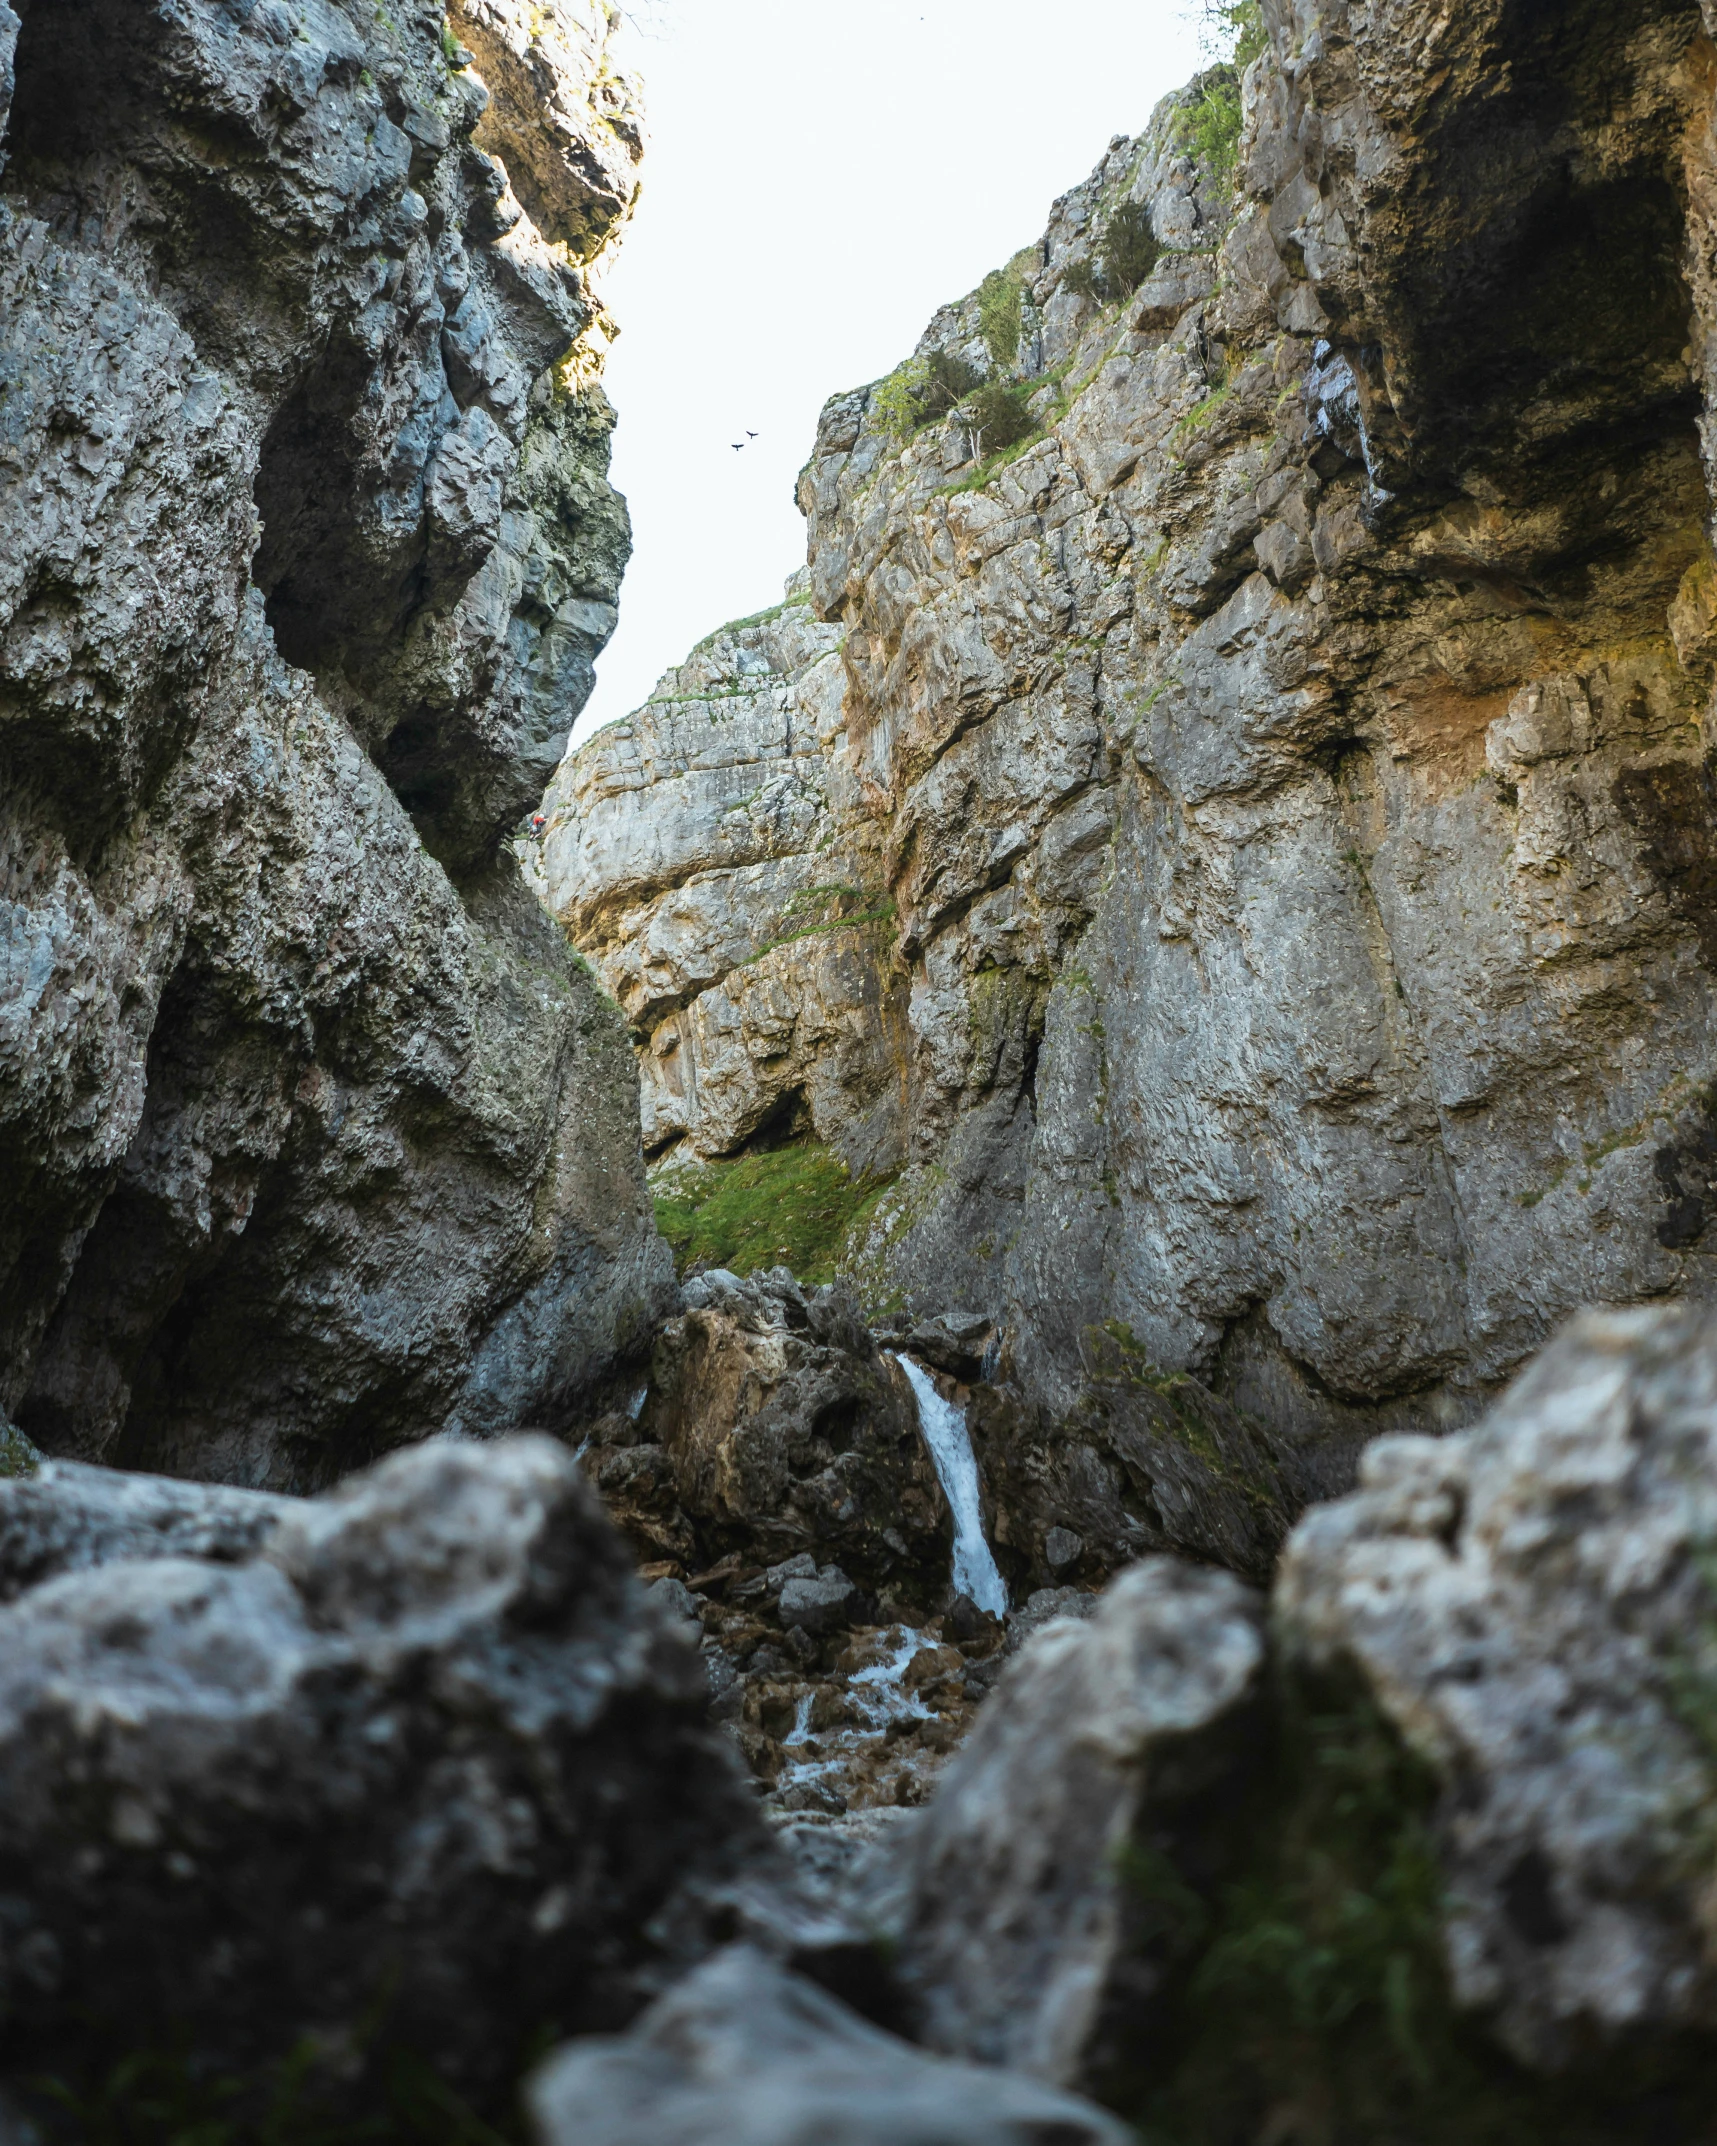 a view looking down at a mountain stream with some rocks and a cliff